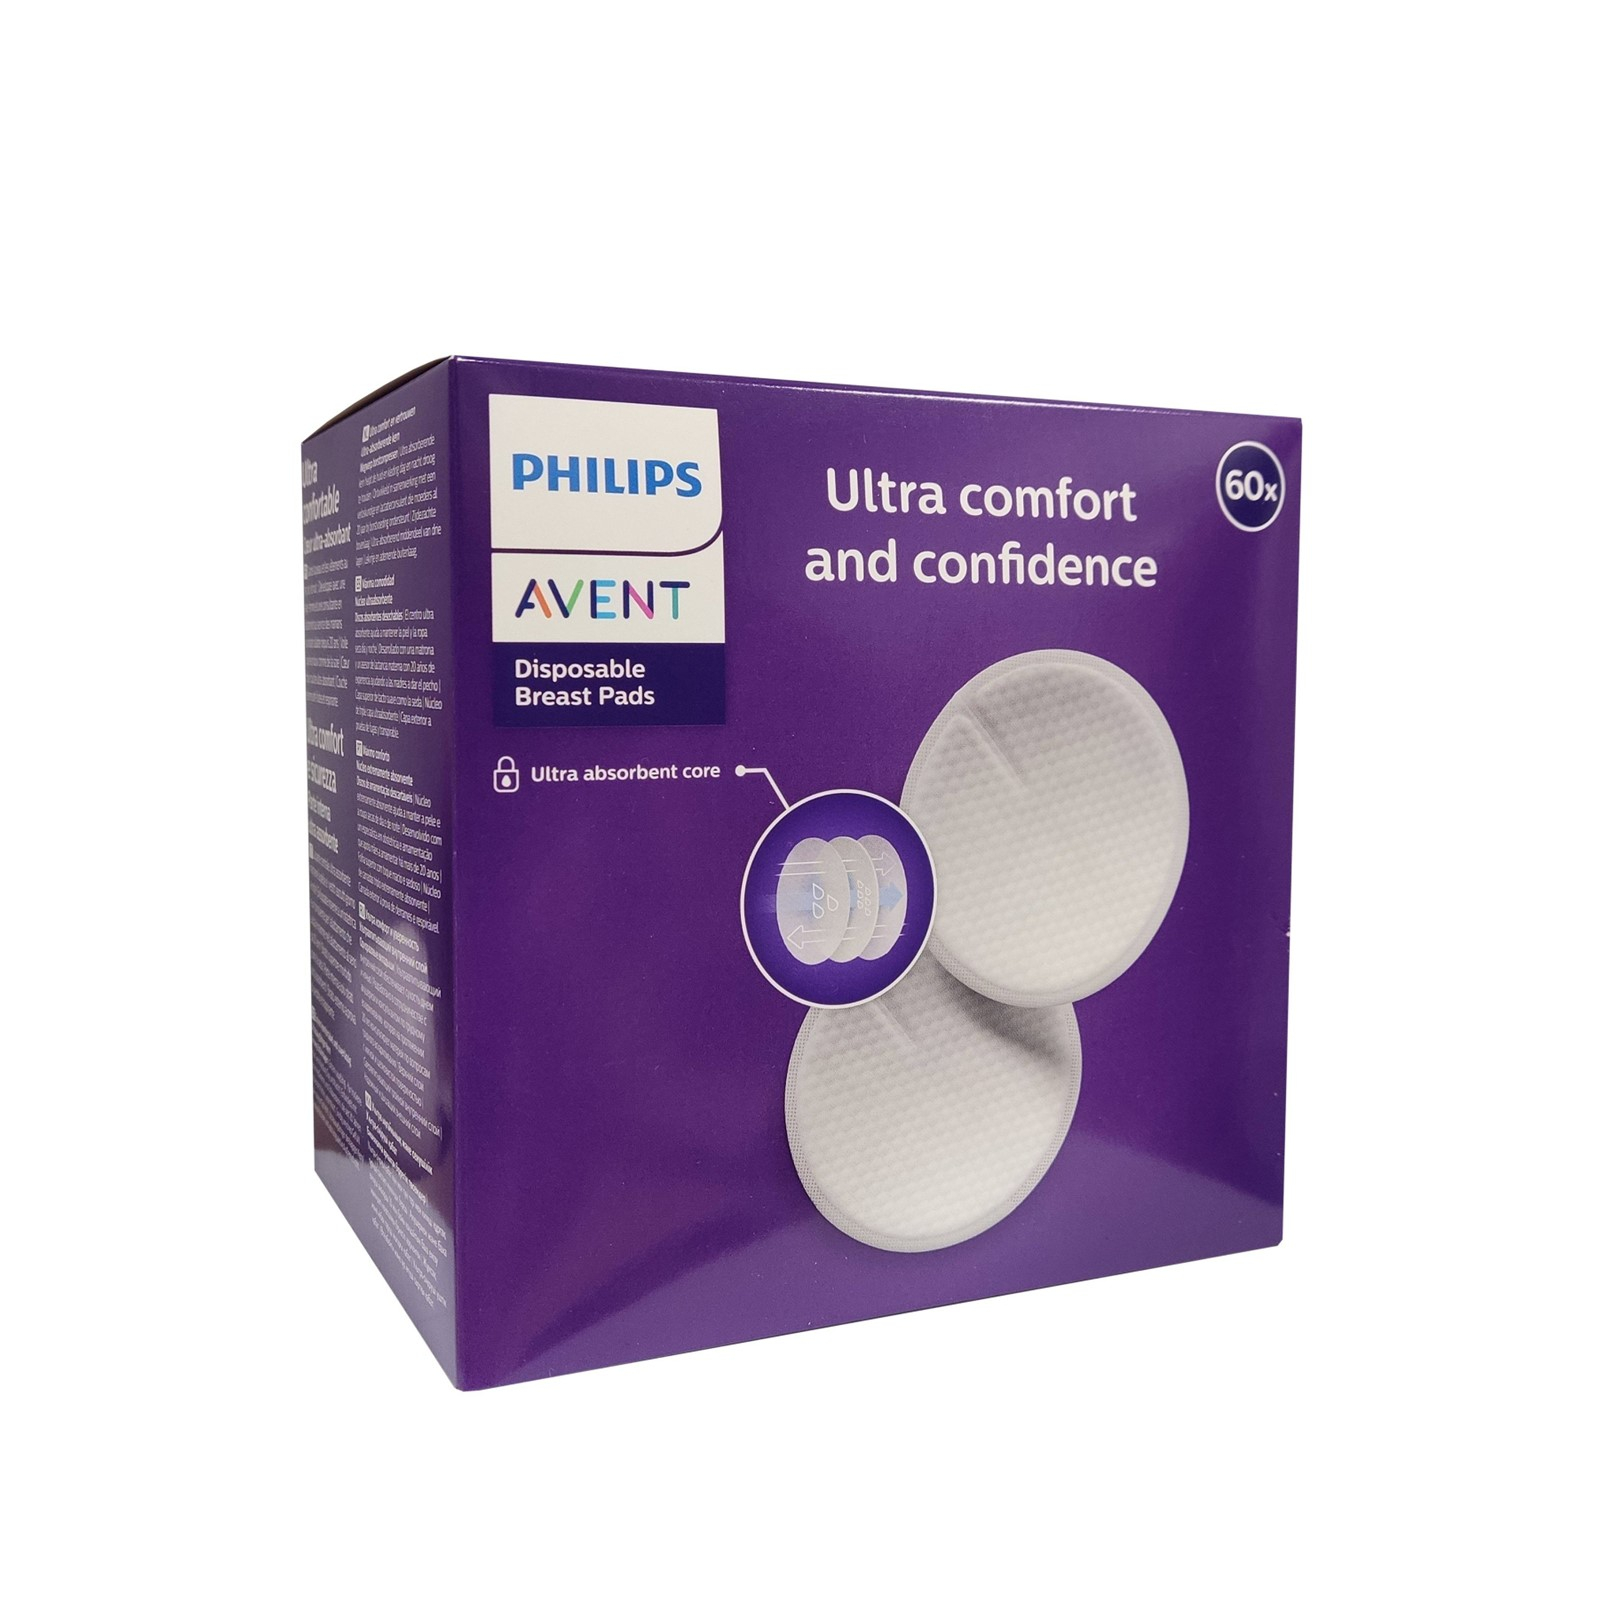 https://static.beautytocare.com/media/catalog/product/p/h/philips-avent-disposable-breast-pads-x60.jpg